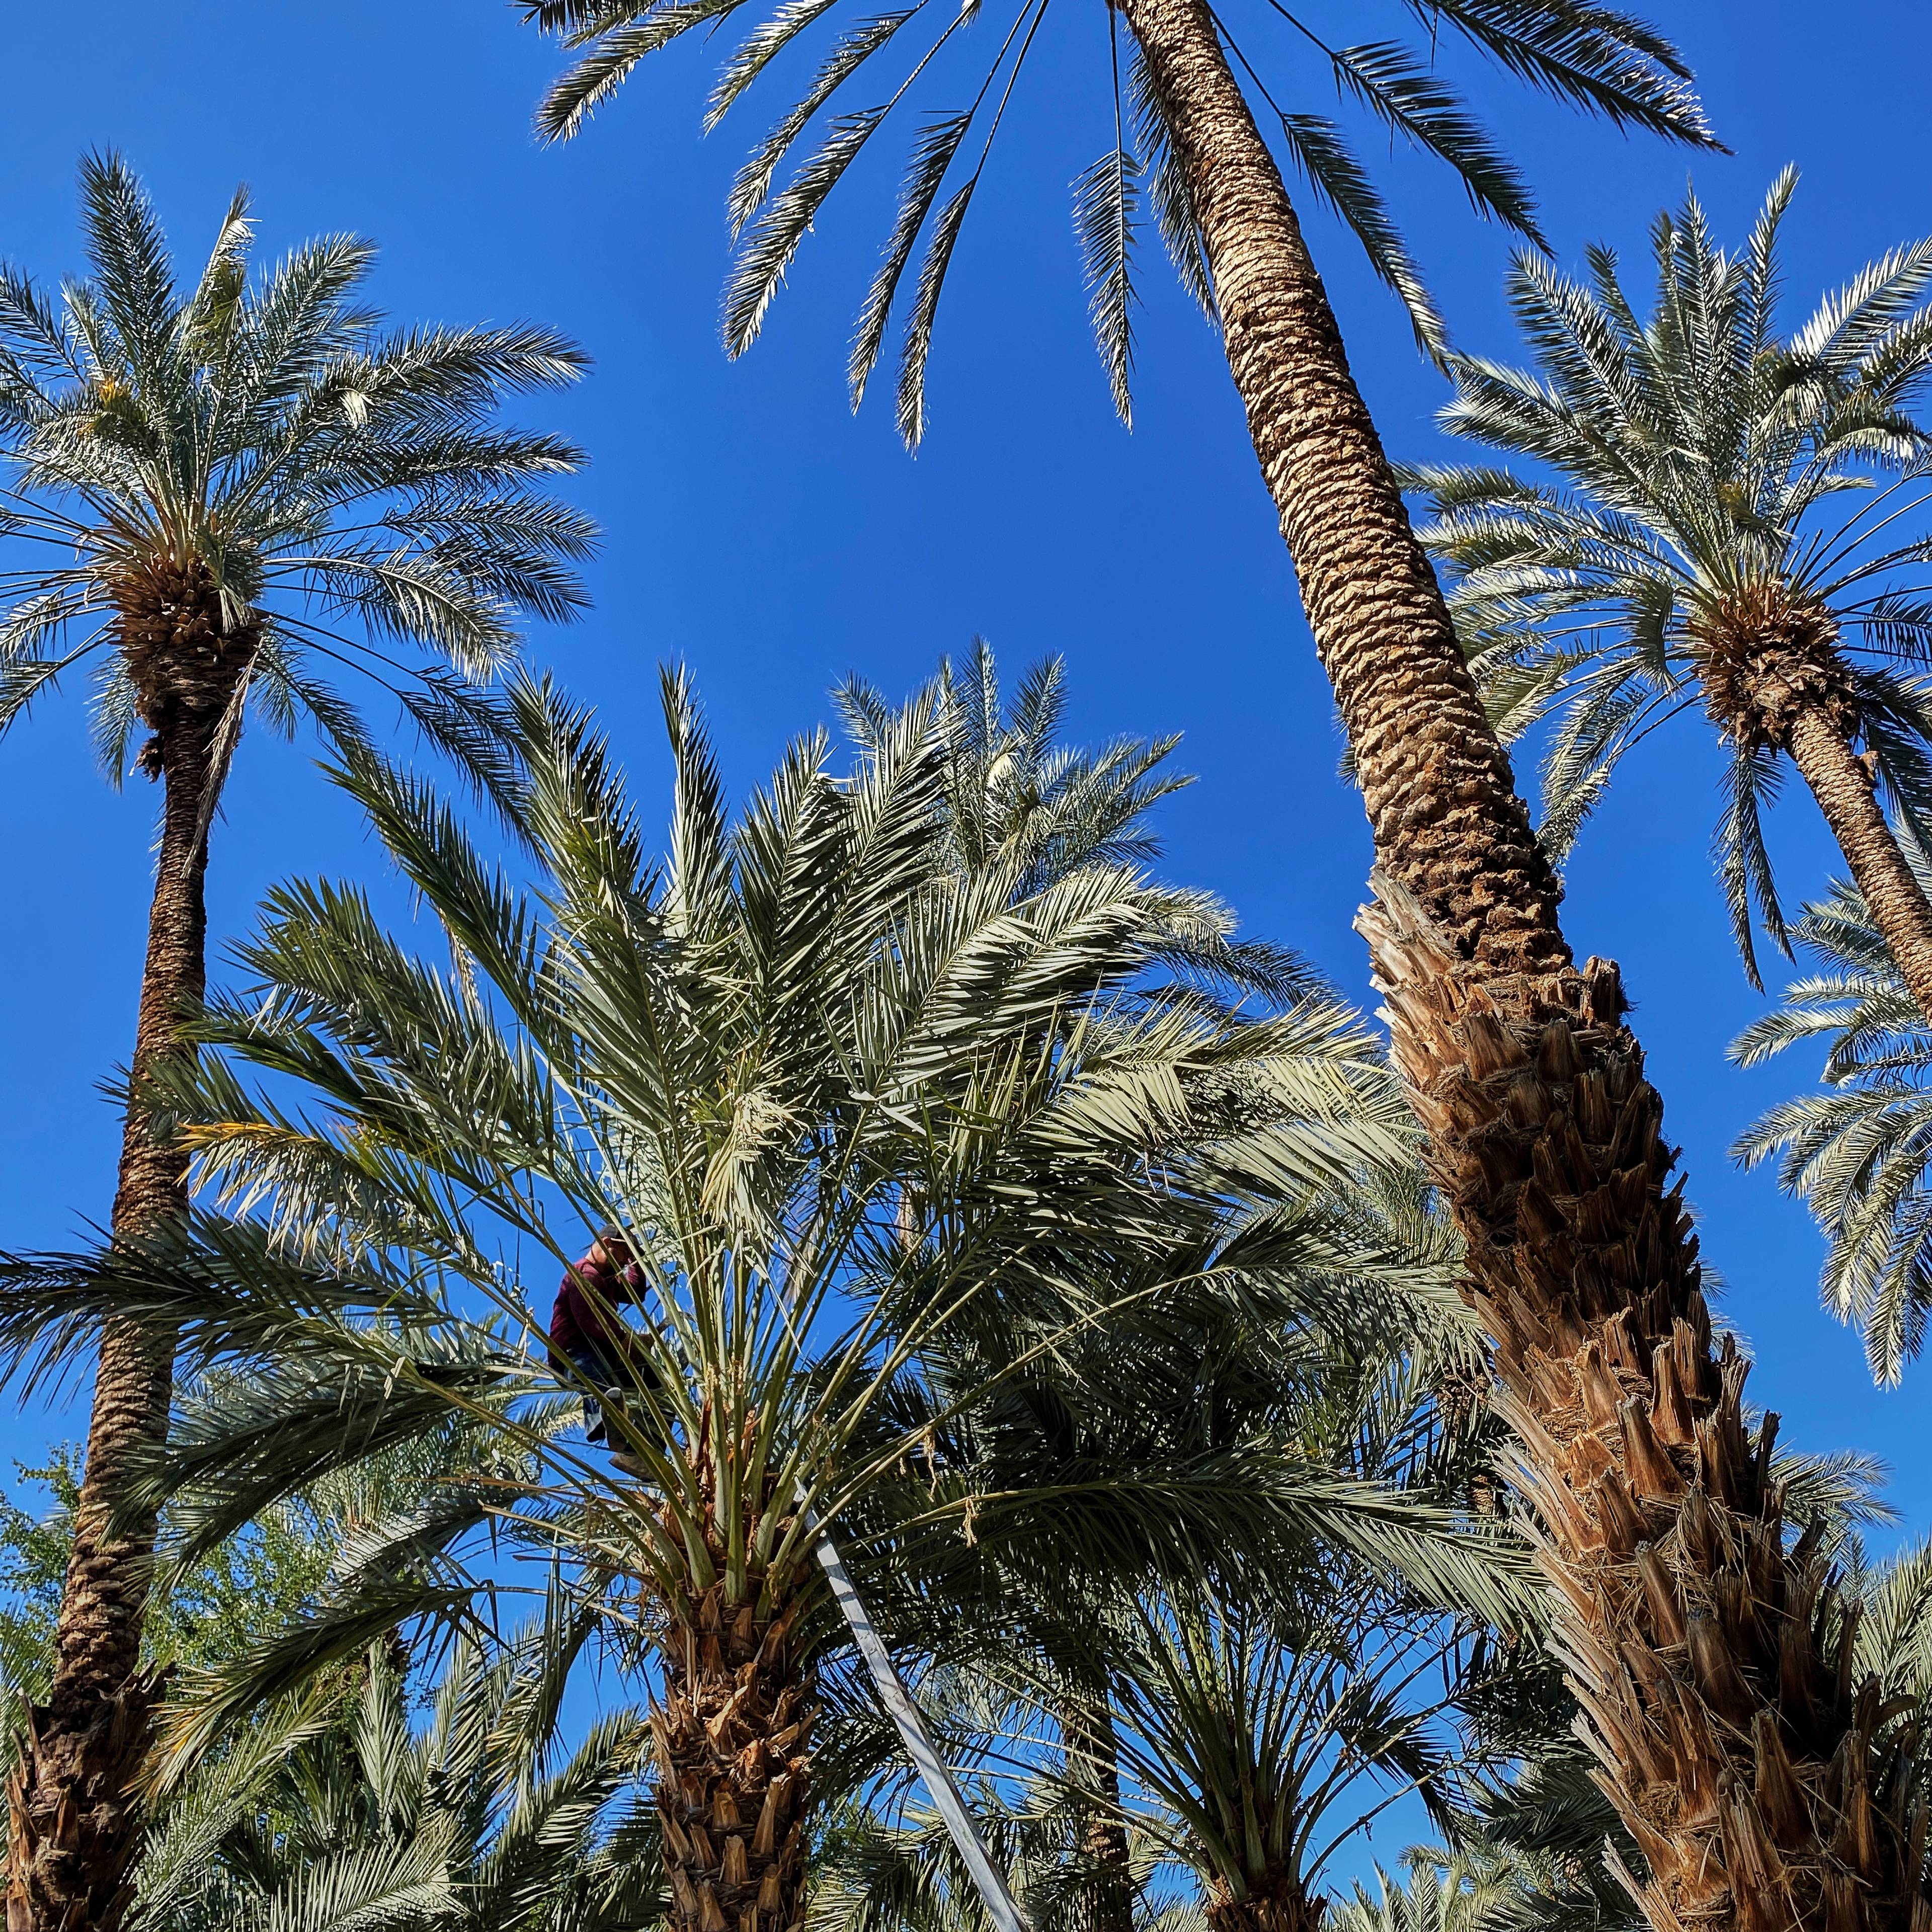 Palm trees in California